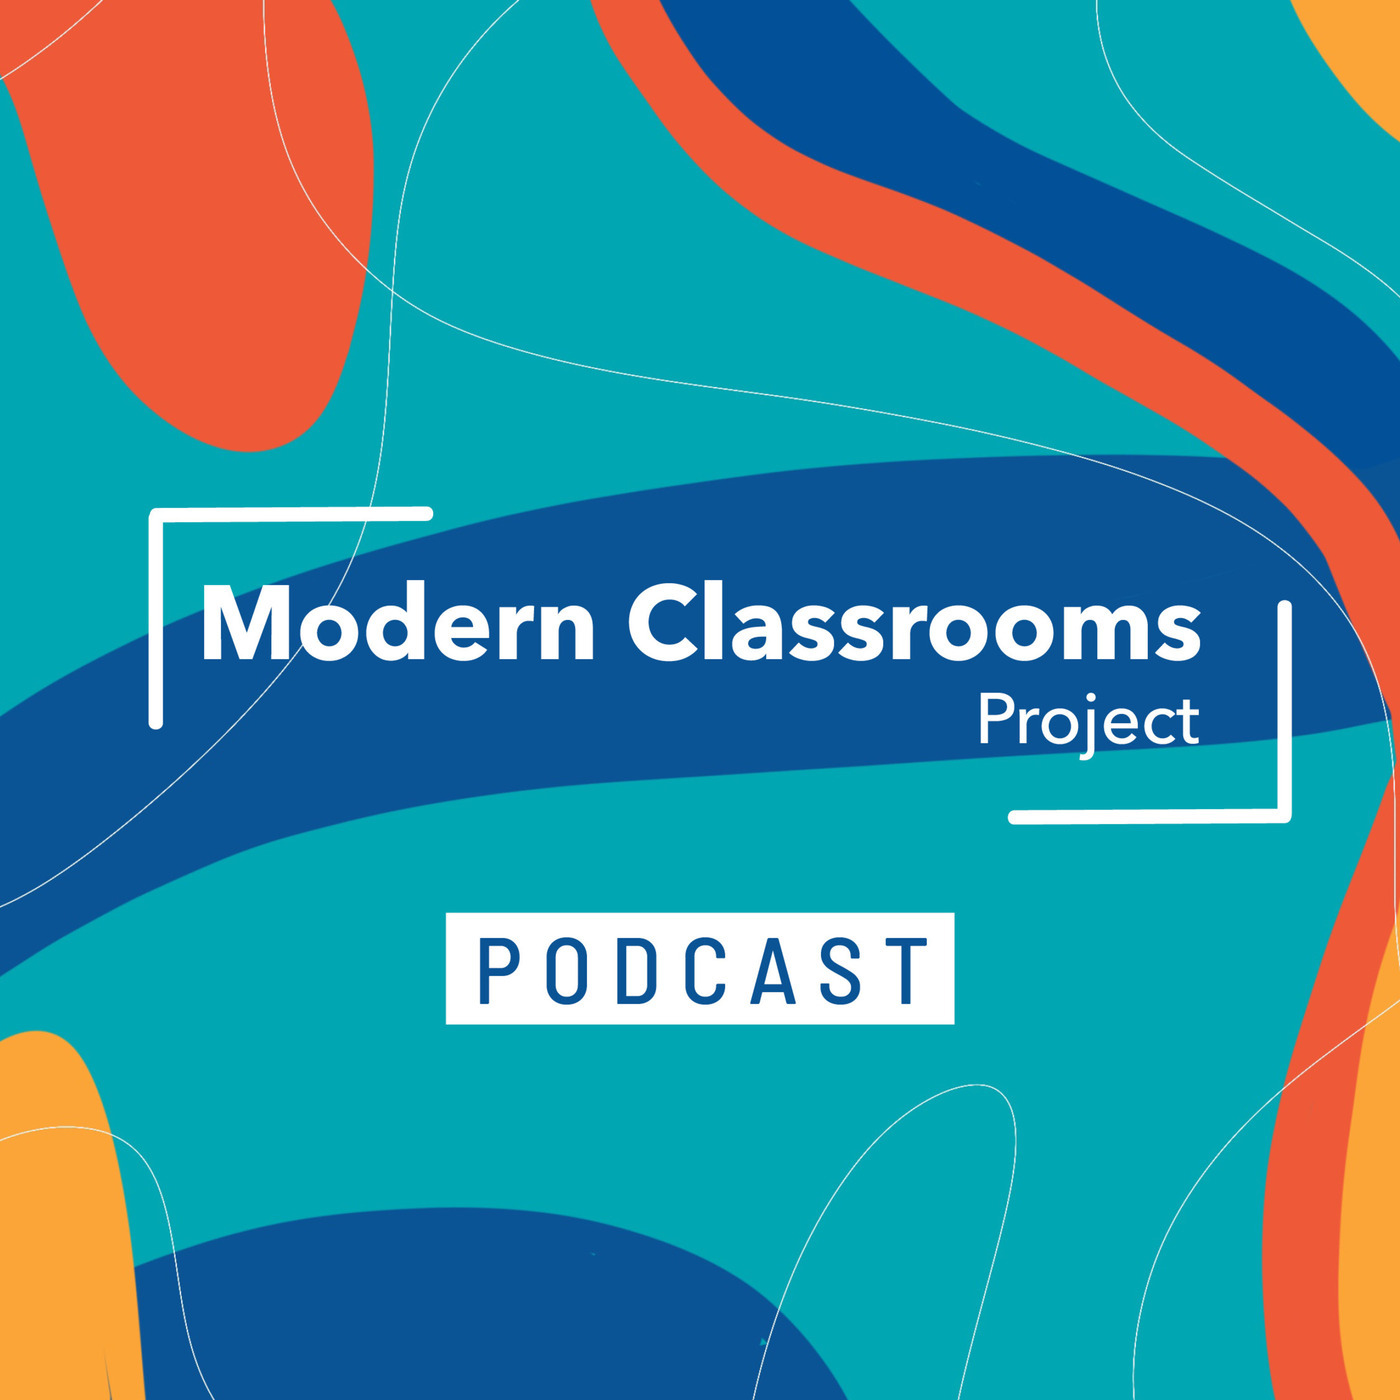 Modern Classrooms Project Podcast 158: Automated Grading vs. Teacher Grading